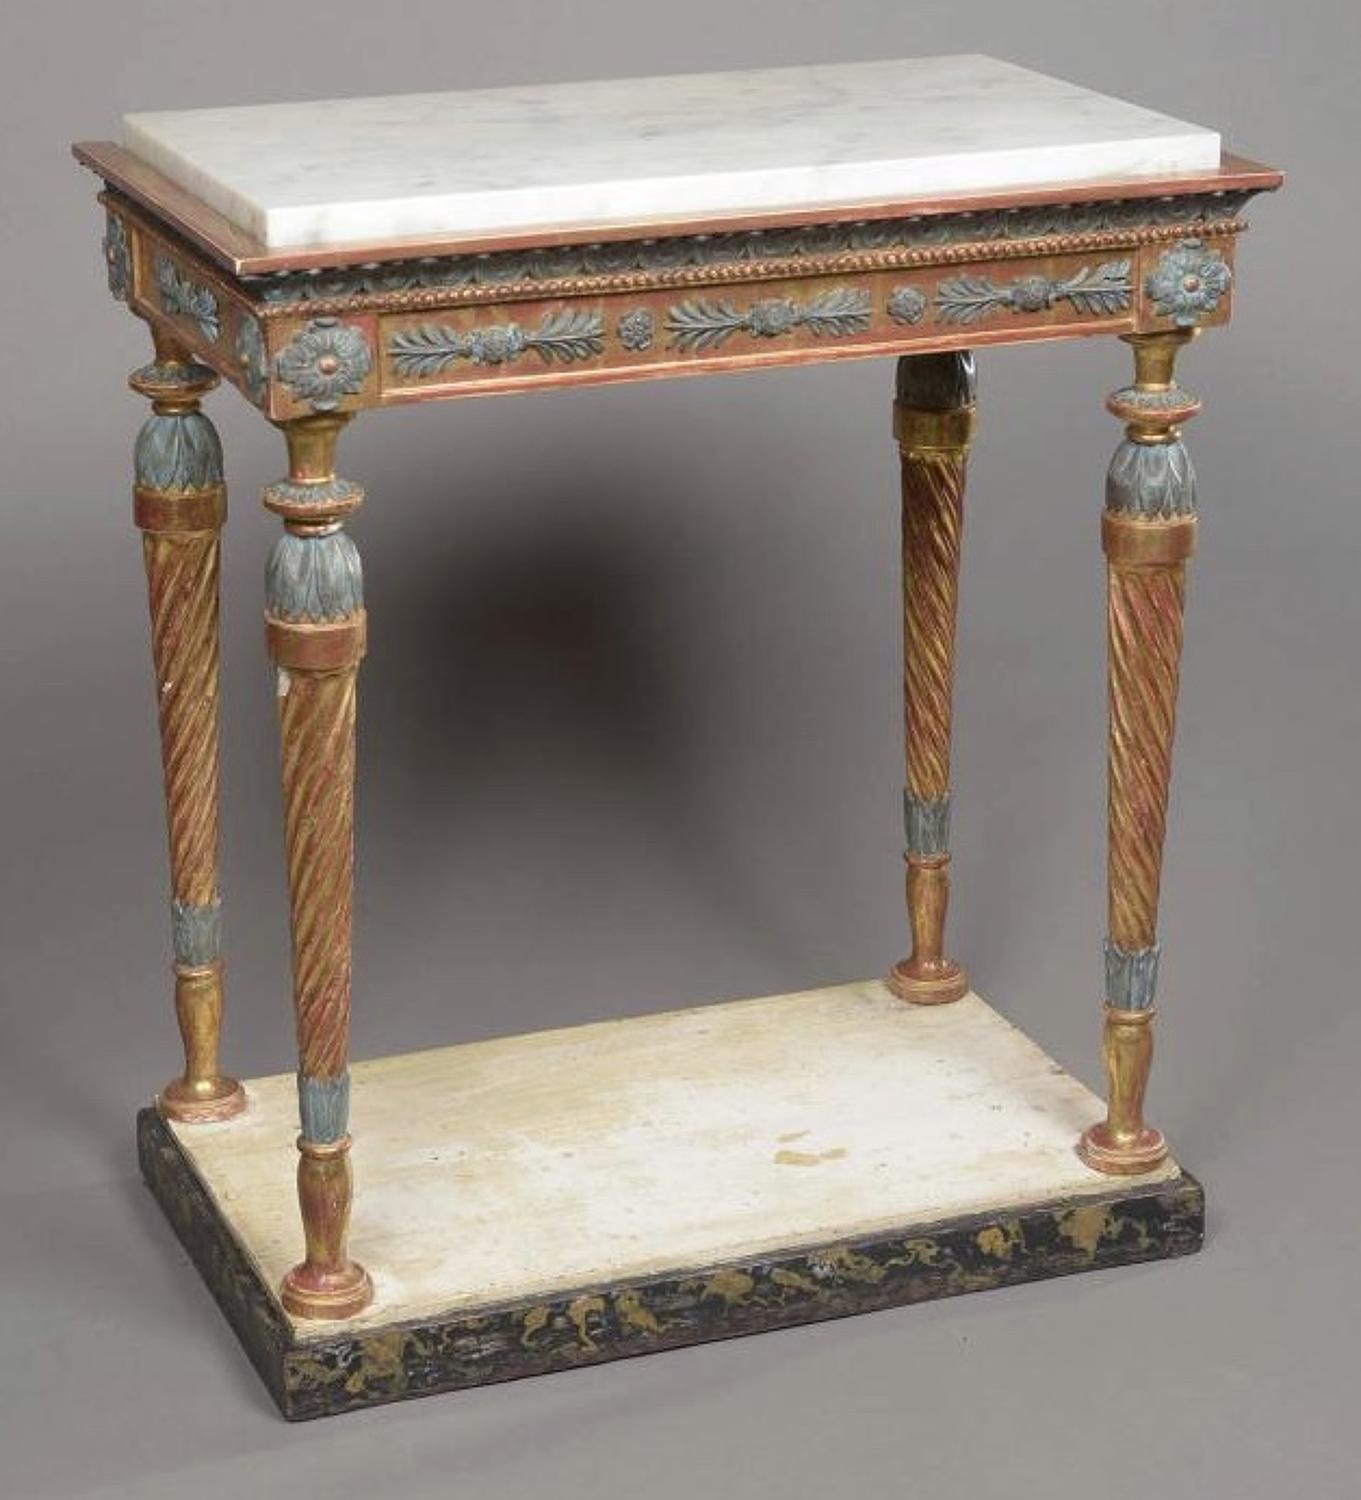 AN EARLY 19TH CENTURY SWEDISH CONSOLE